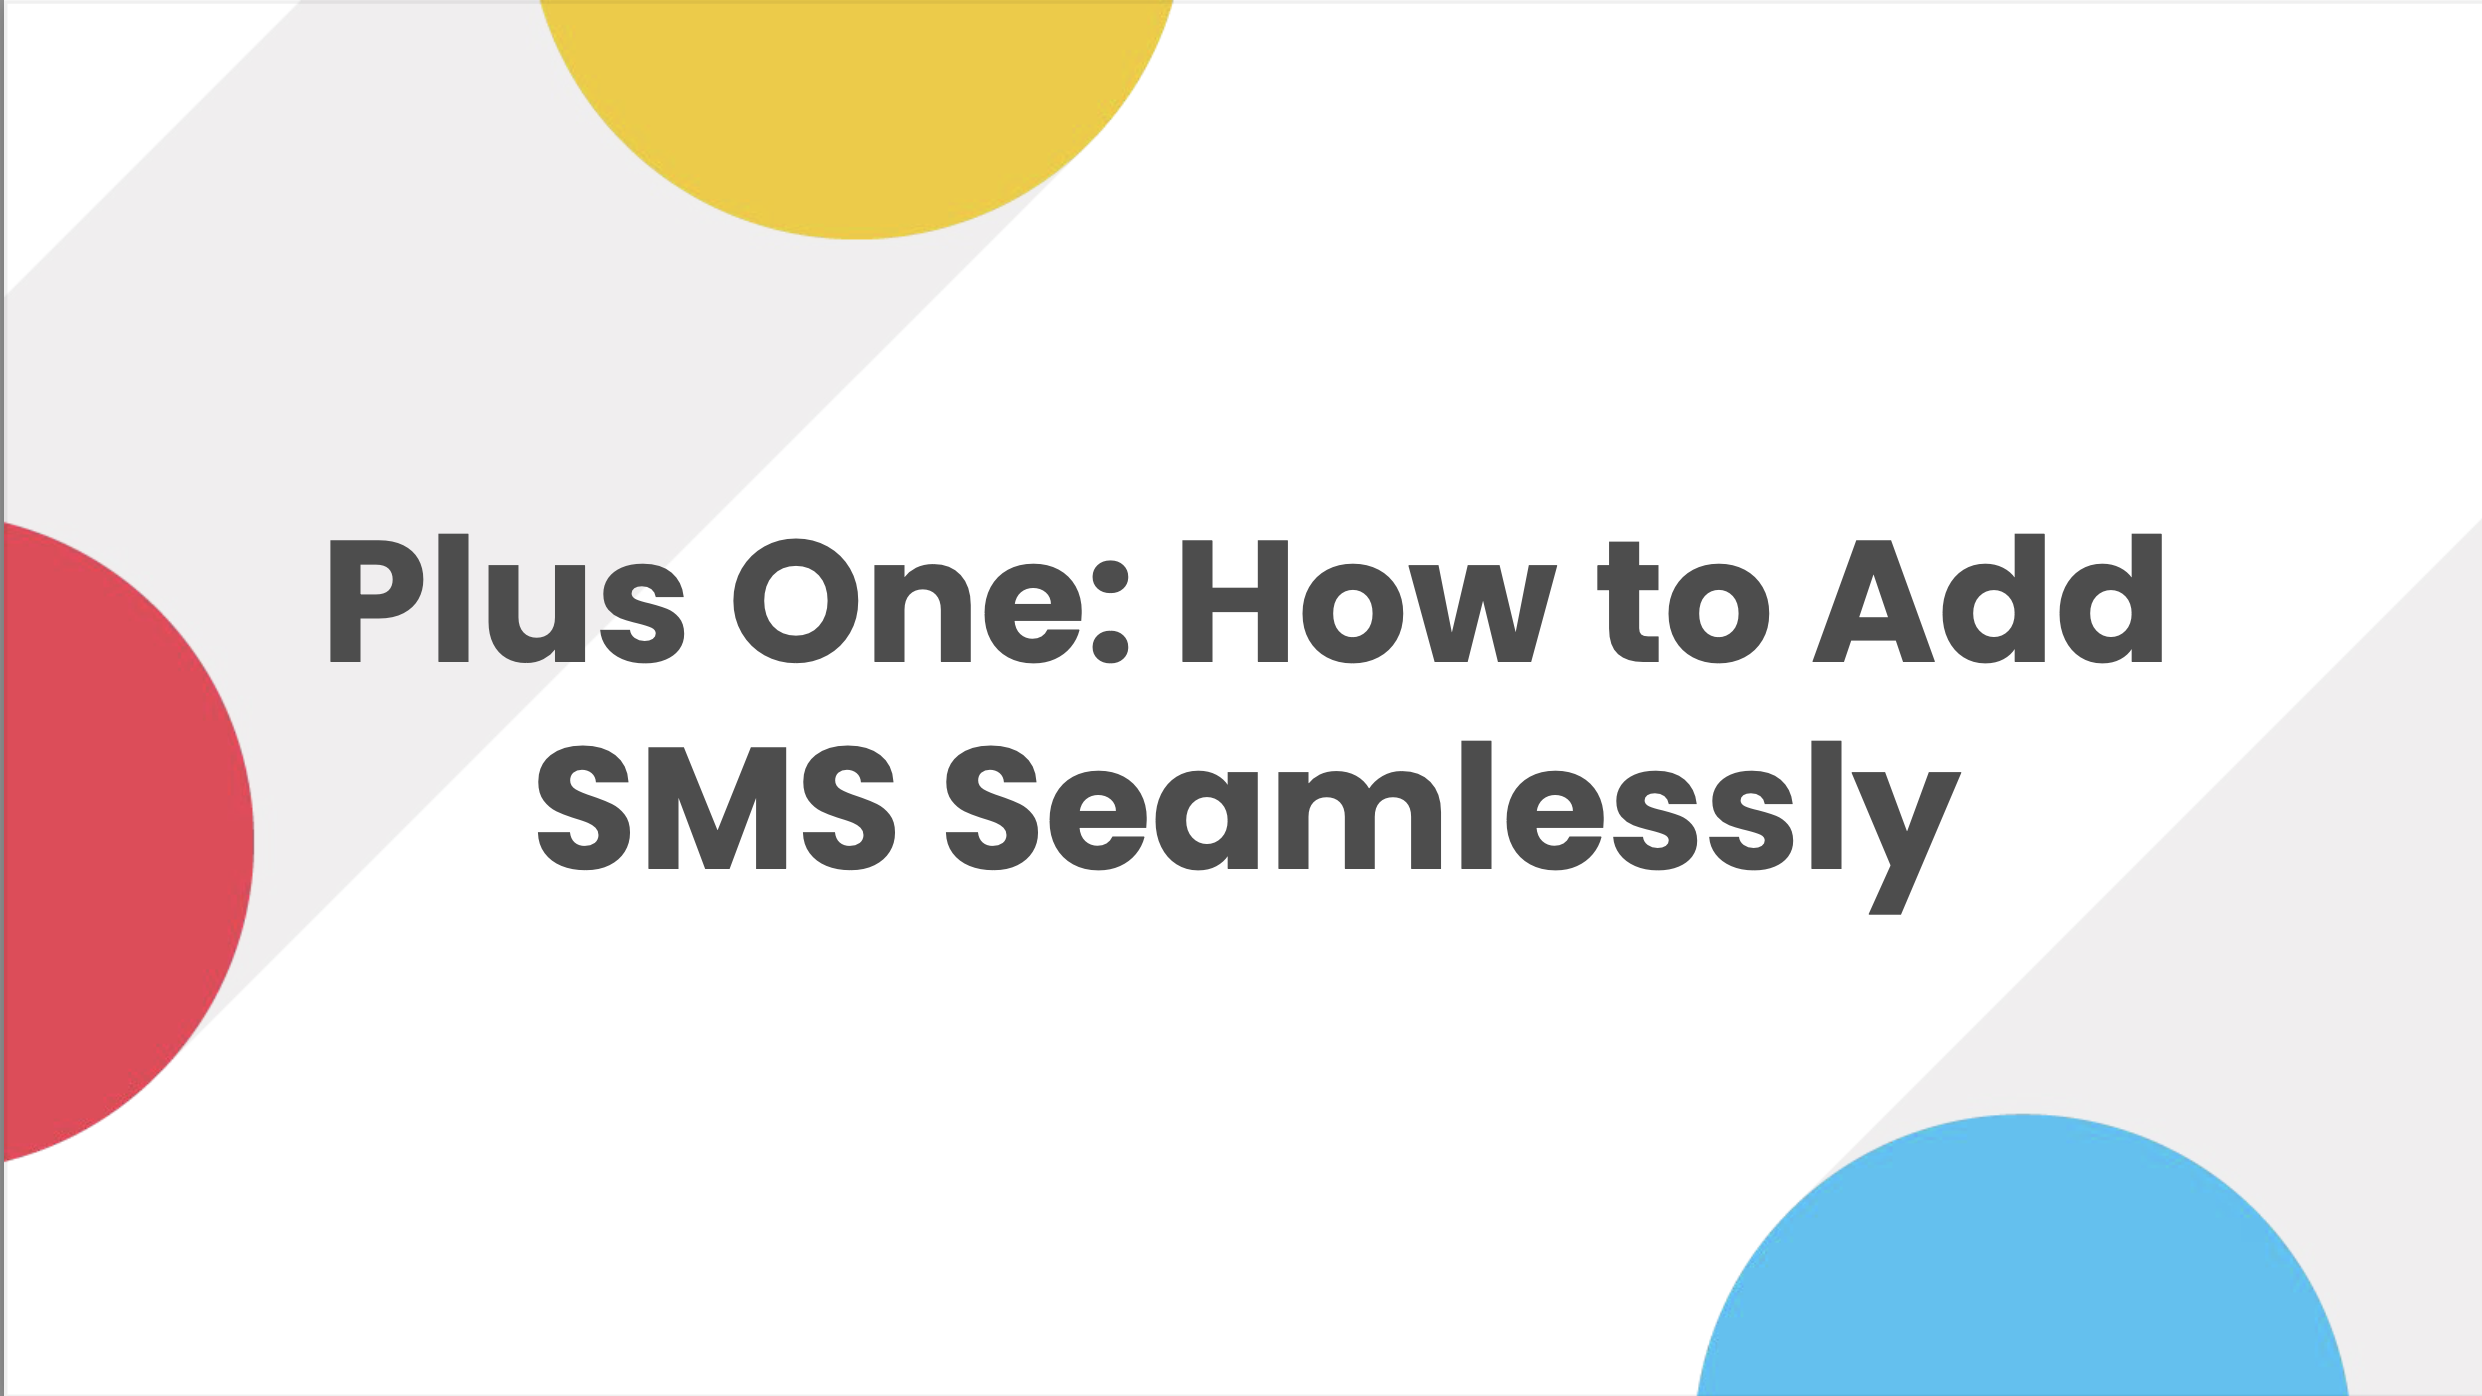 Plus One: Adding SMS Seamlessly